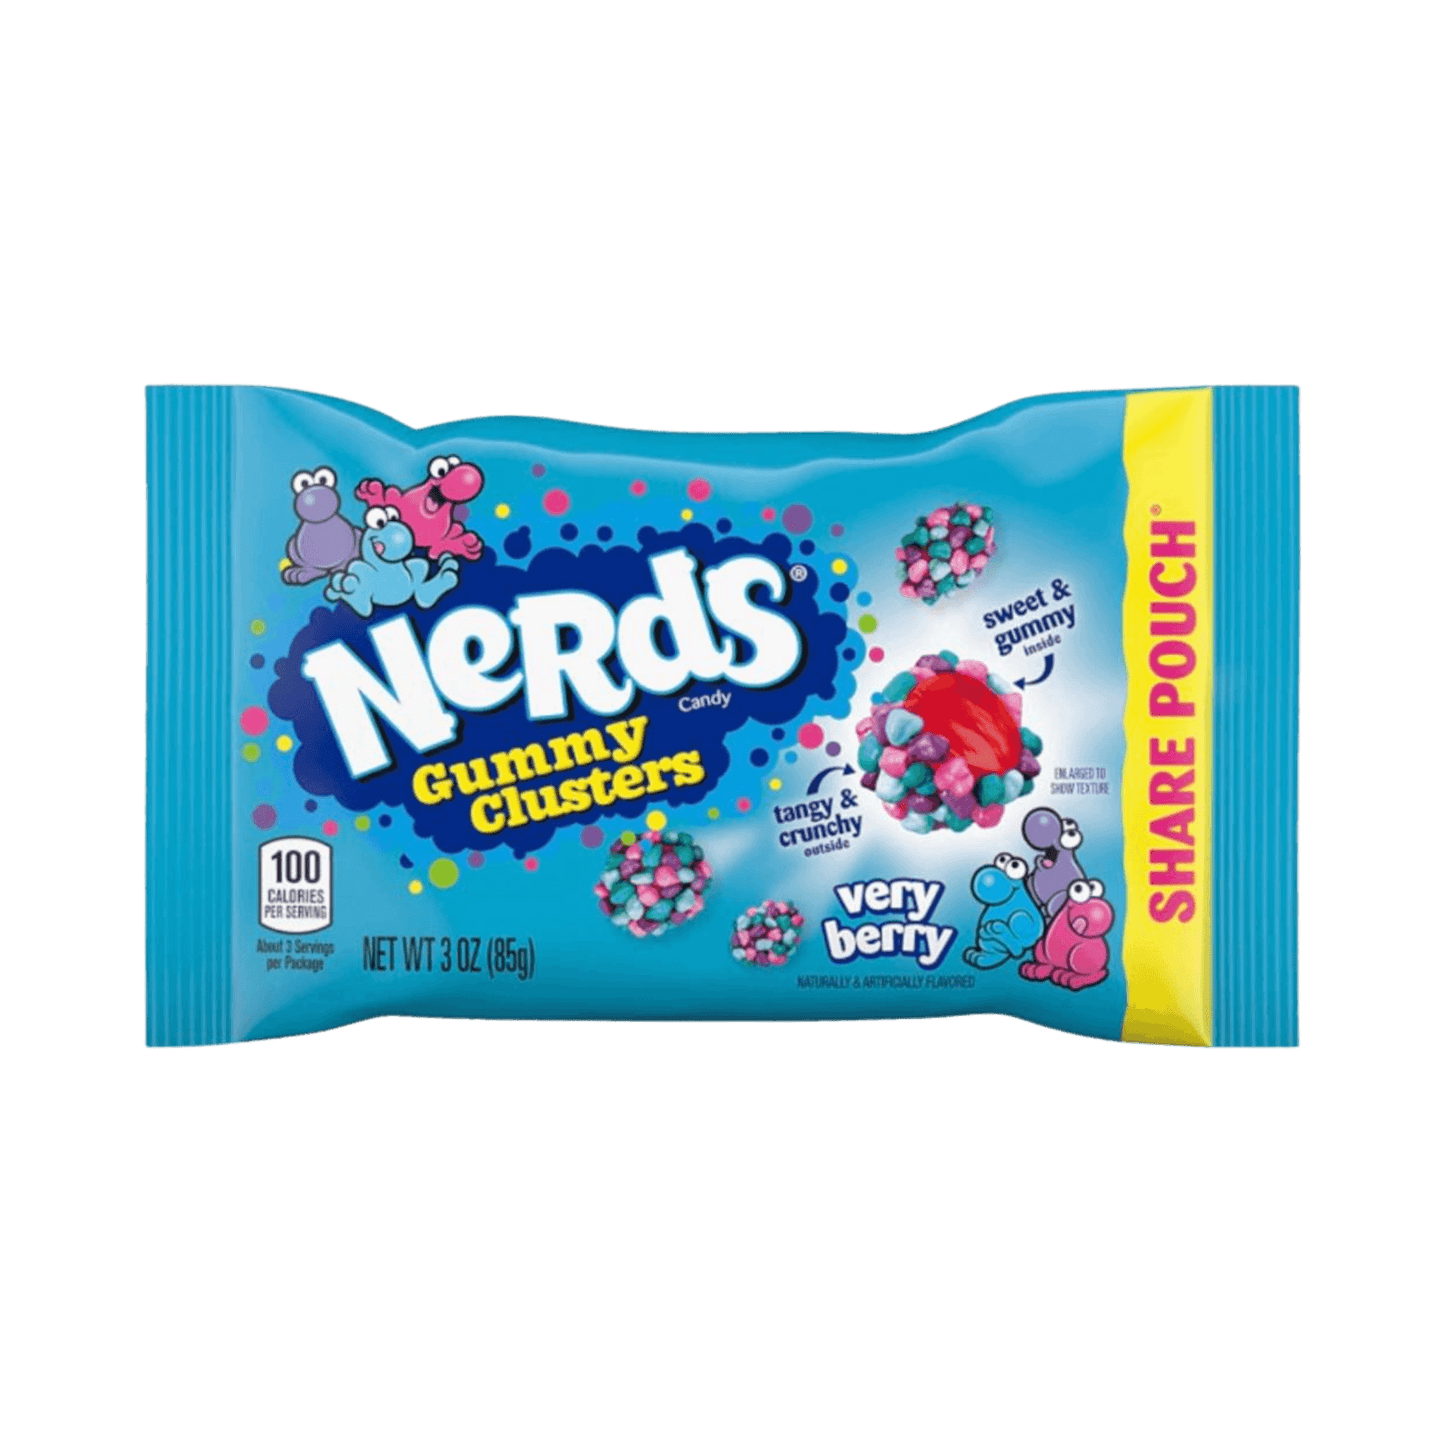 Nerds | Gummy Clusters Very Berry (85g) - Chewy Candy - Scran.ie